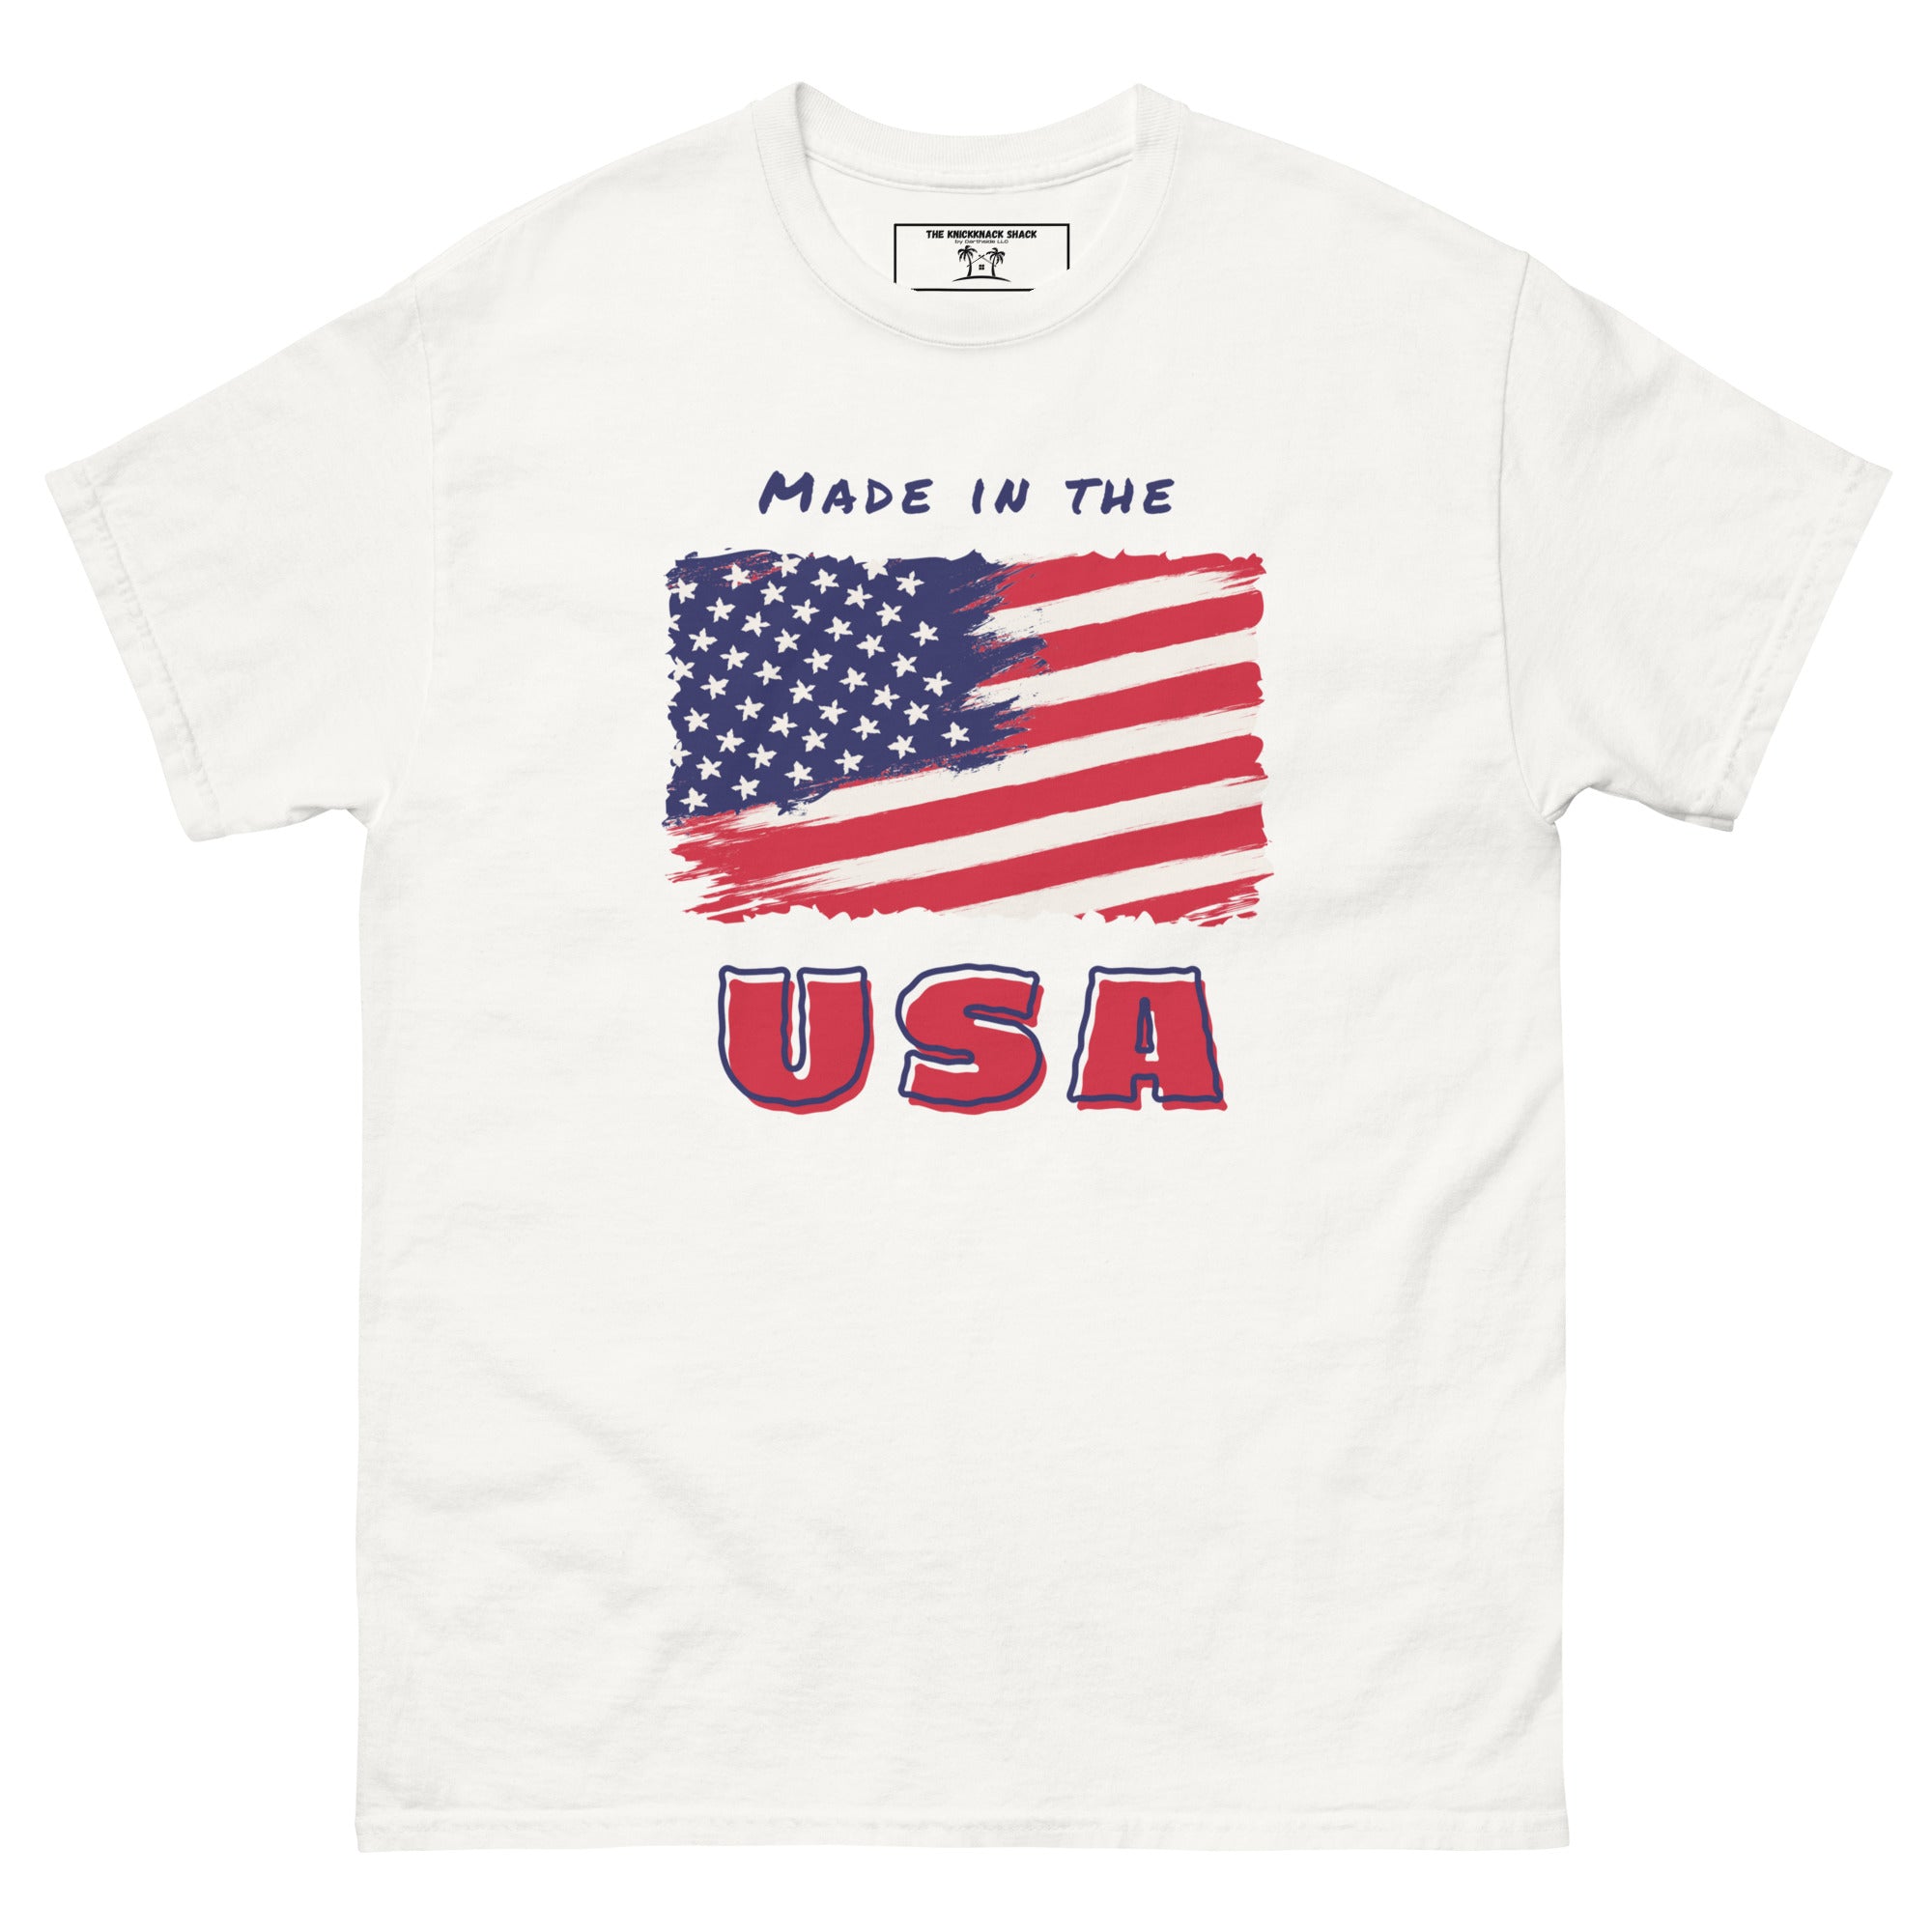 Classic Tee - Made in the USA (Light Colors)